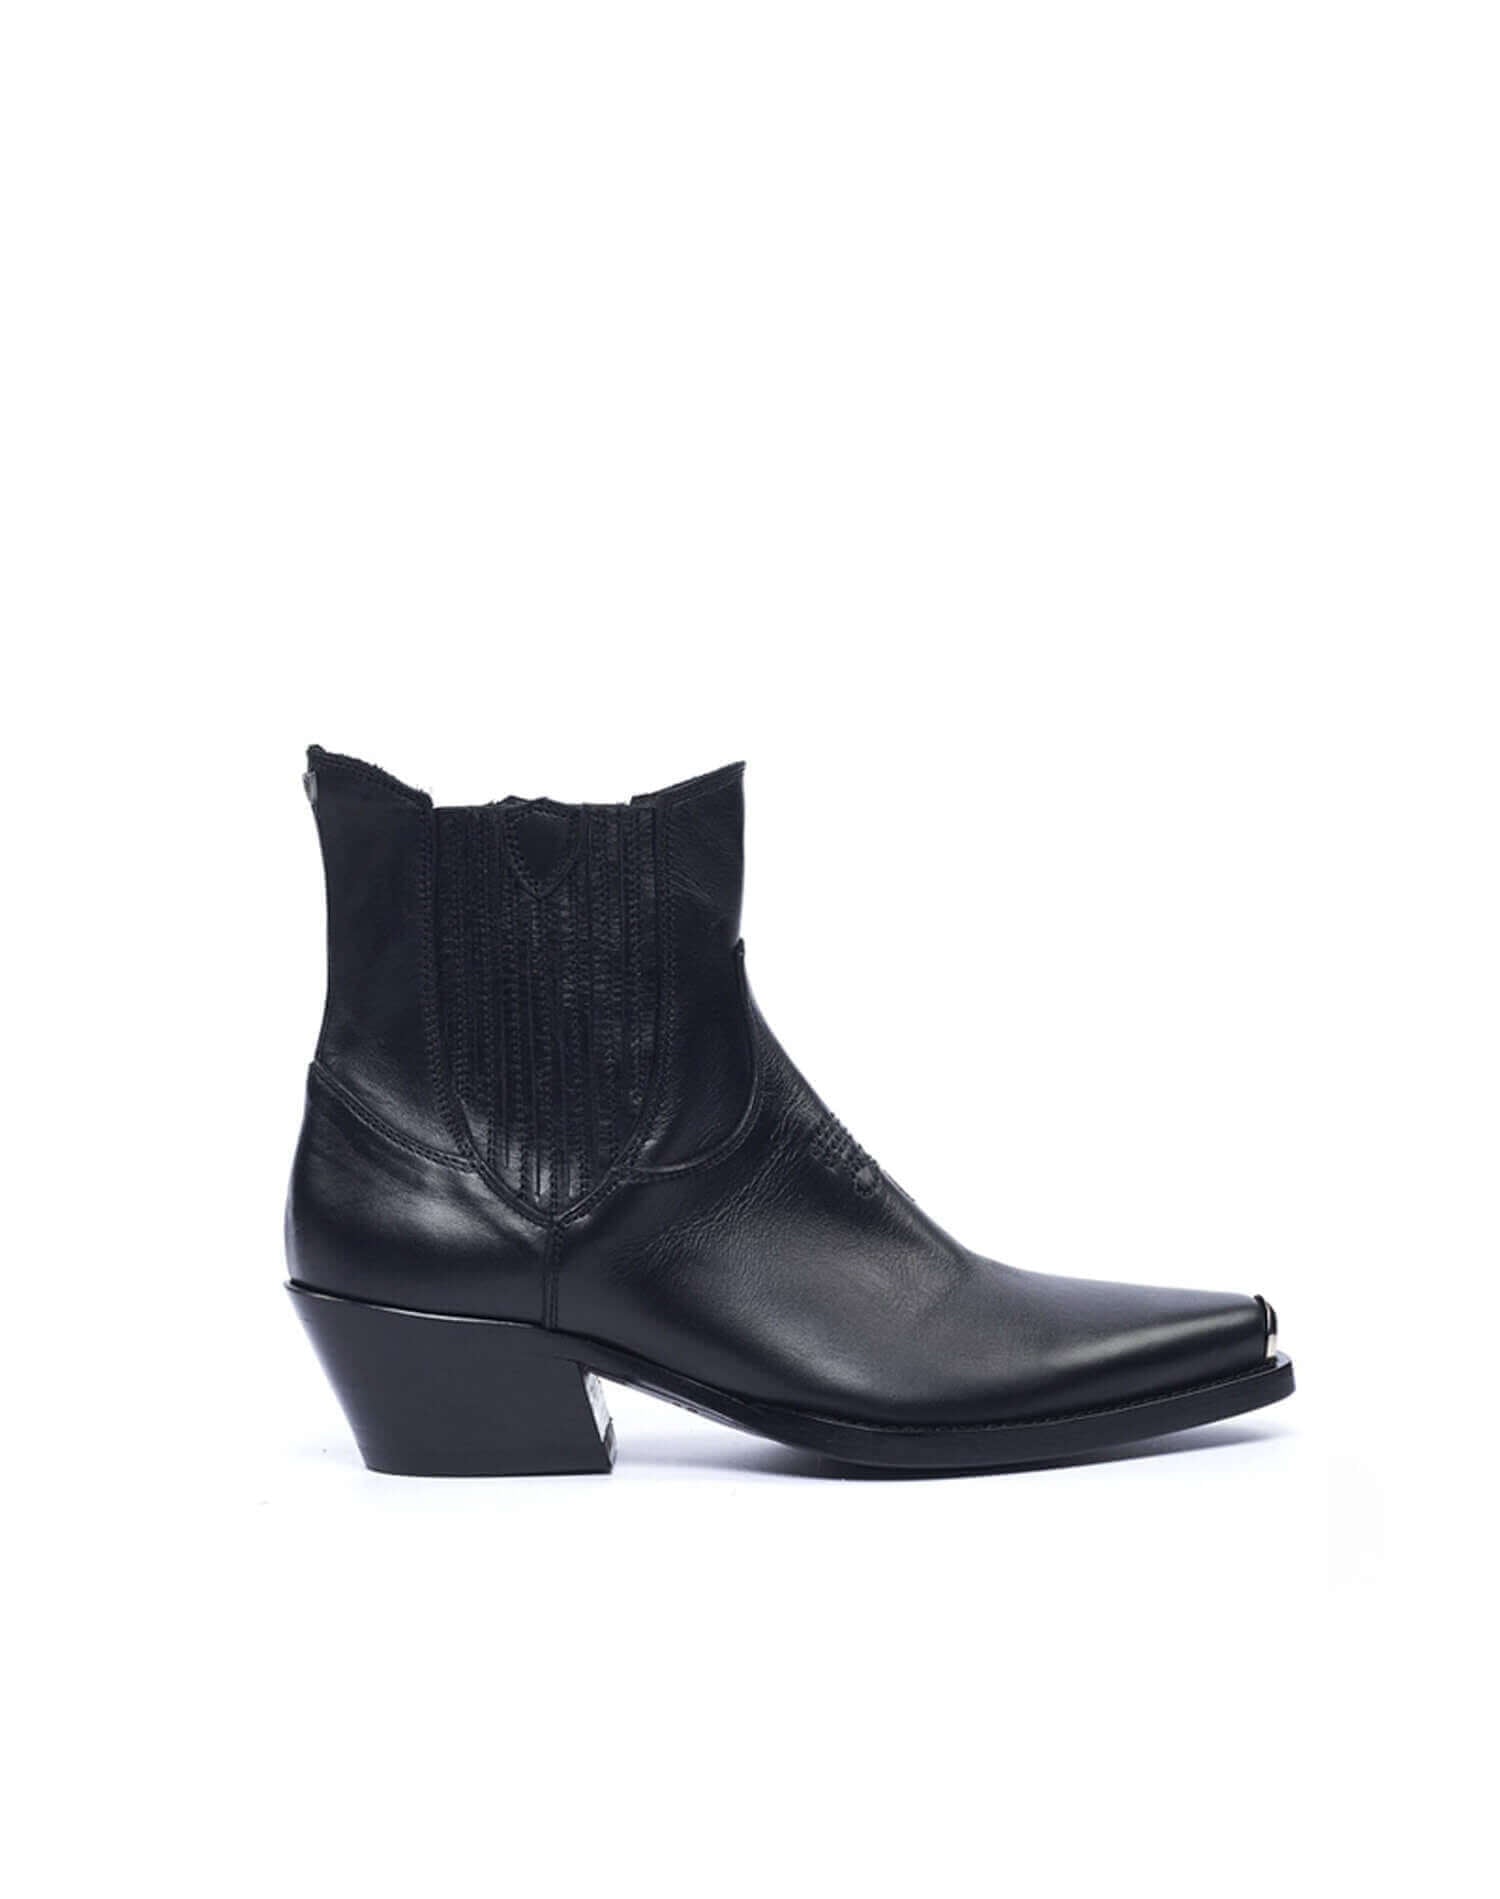 CHELSEA BOOT Black leather 'Texas' boots. Squared metal tip. Elastic closure on the sides. Heel height: 5 cm. Made in Italy. HTC LOS ANGELES